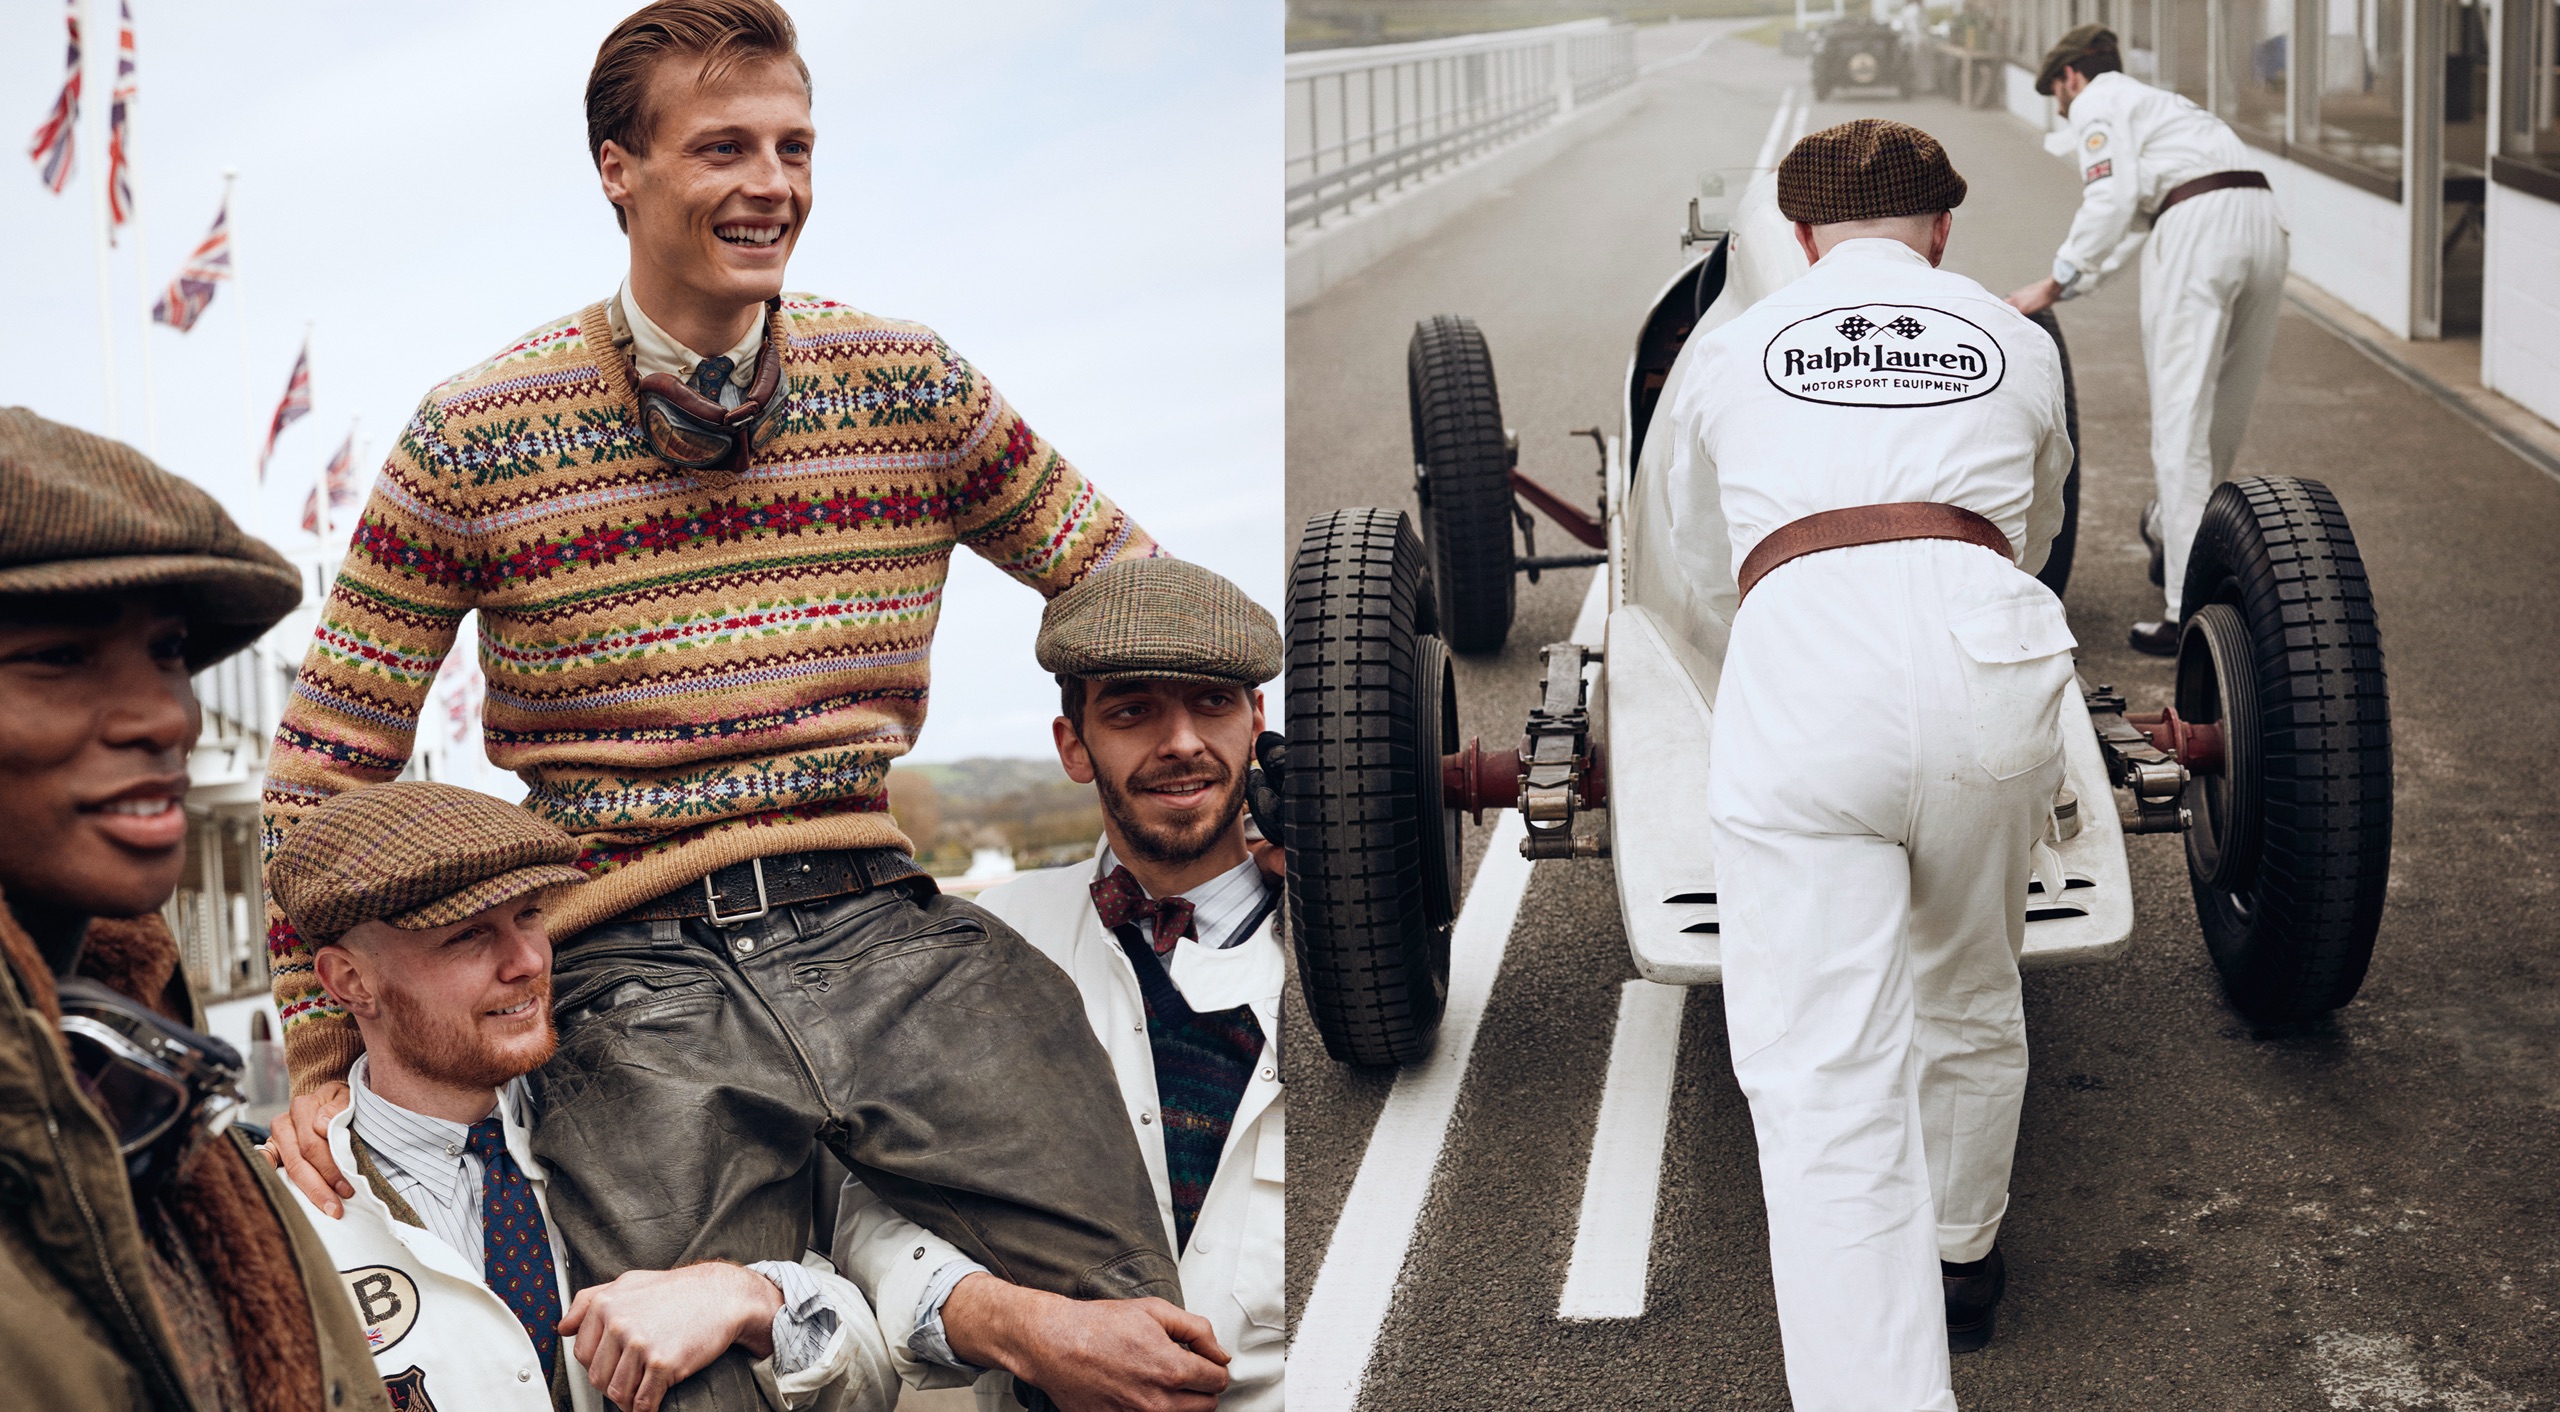 <strong>ON LOCATION</strong><br/><span>This season of Polo Originals, inspired by the golden era of Grand Prix car racing, was photographed at the Goodwood Motor Circuit, which is located in West Sussex, on the 12,000-acre Goodwood Estate. The Circuit has since become known for hosting a number of prestigious motorsport events, including the famous Festival of Speed and Revival.</span> <br/><rlmag_link href="https://www.ralphlauren.global/ge/en/search?cgid=brands-prl-tough-and-refined-cg"><button class="shop-collection">Shop the Story</button></rlmag_link>